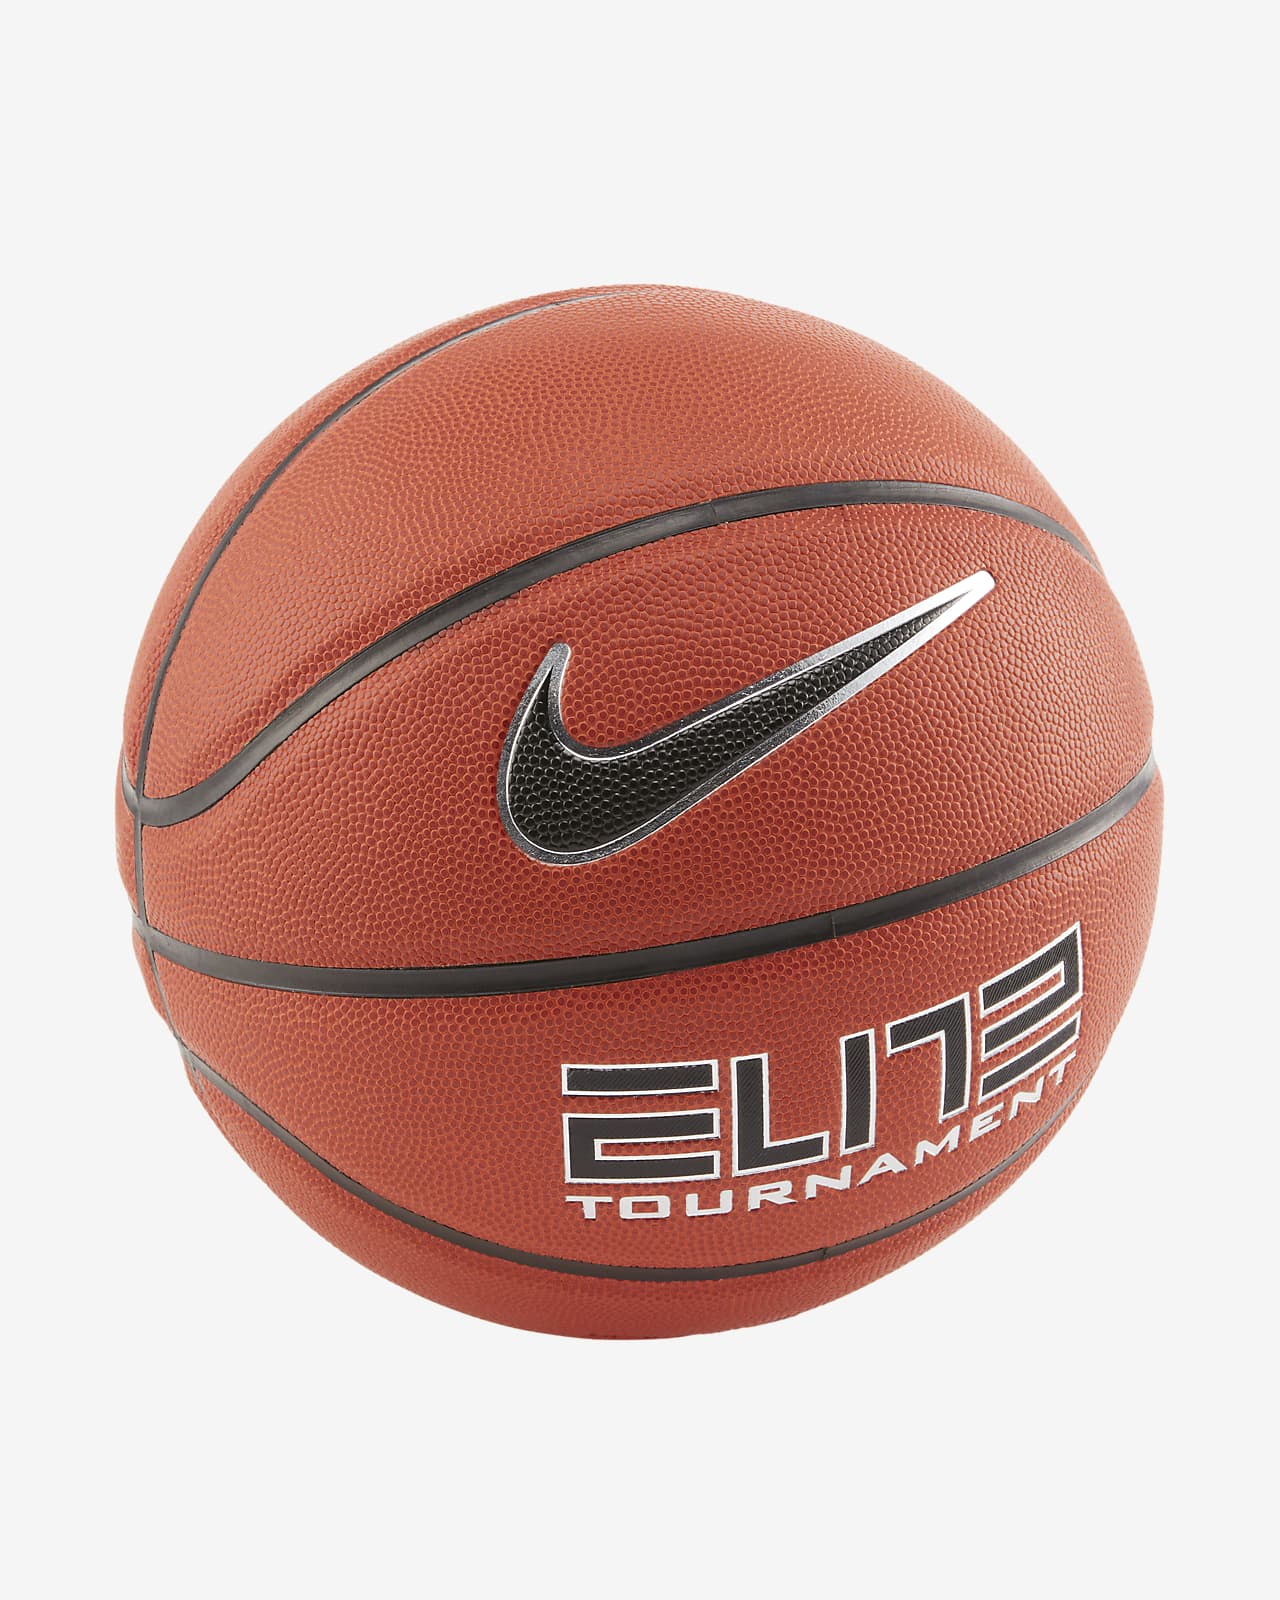 can i buy spalding basketball from nike store